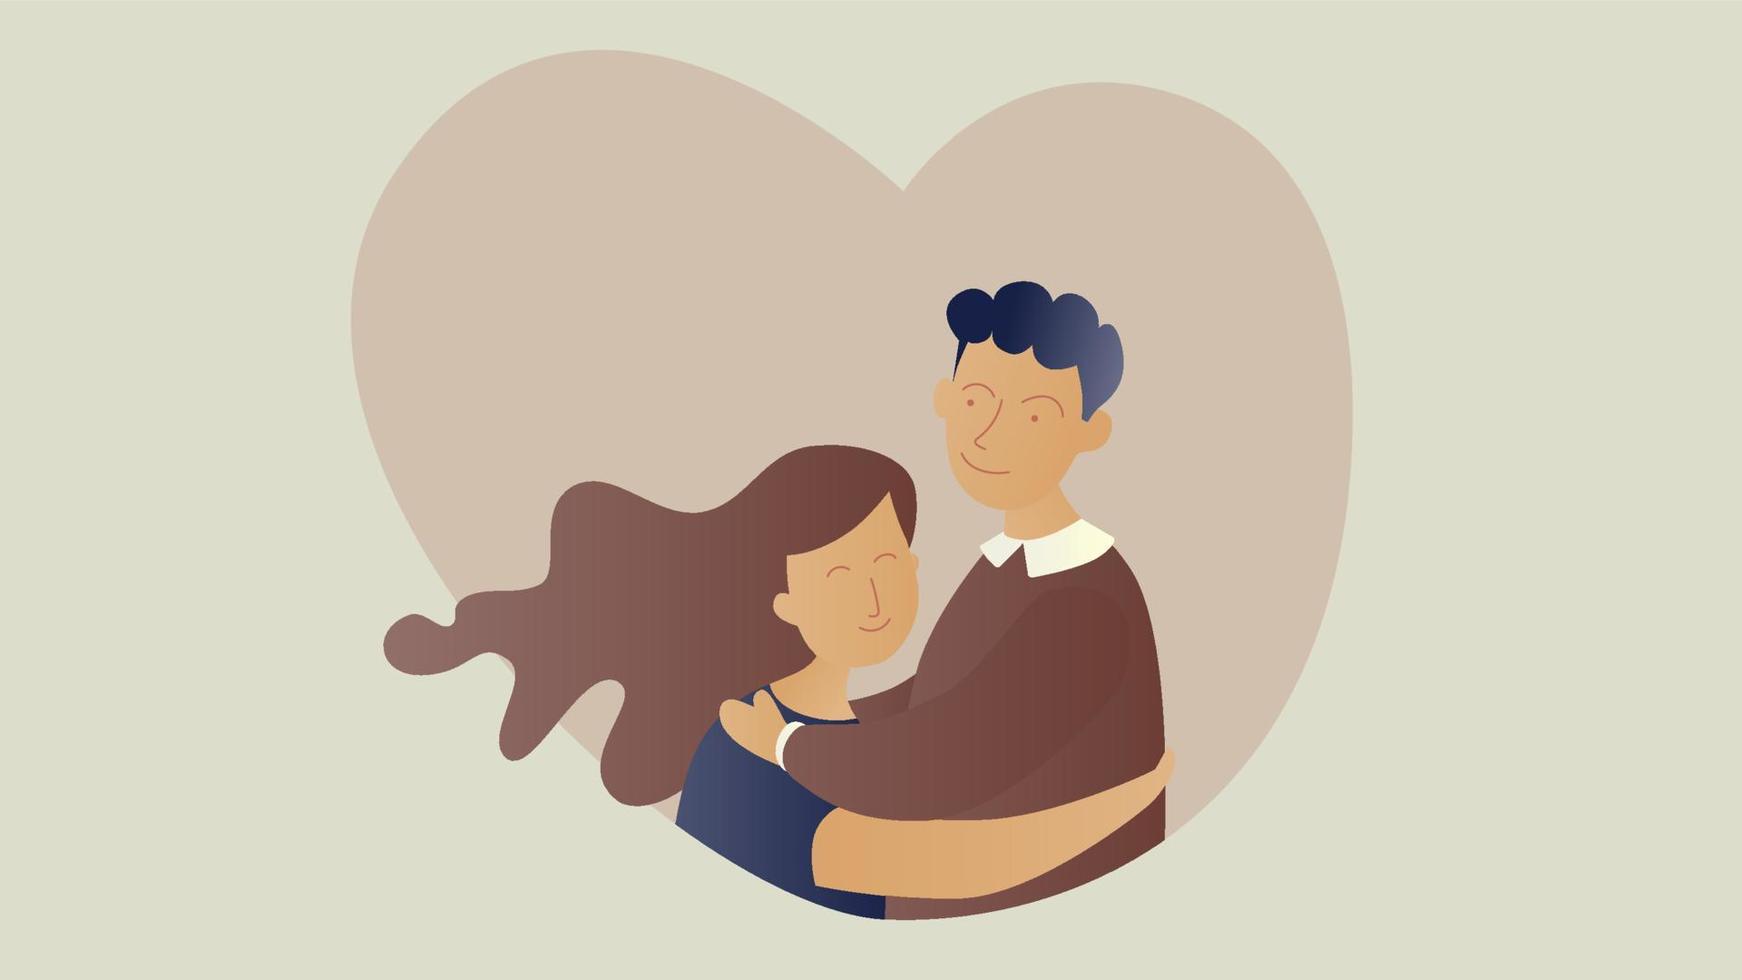 Romantic concept. Couple in love. Two hugging lovers. Vector illustration